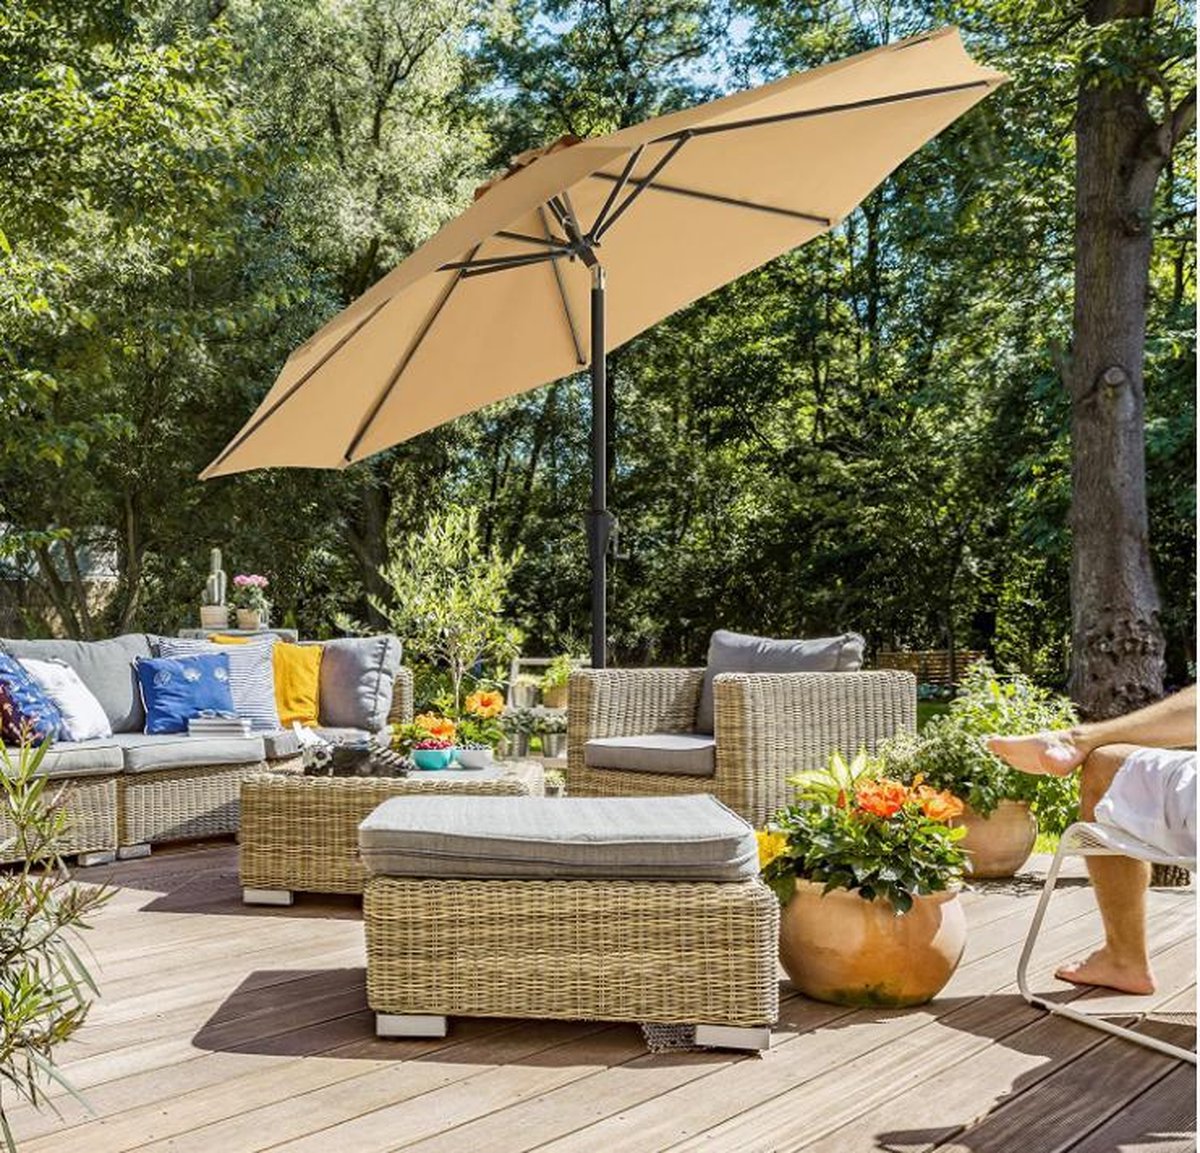 MIRA Home - Parasol - Tuinparasol - Tuin - Buiten - Staal - Polyester - Geel - 300x236